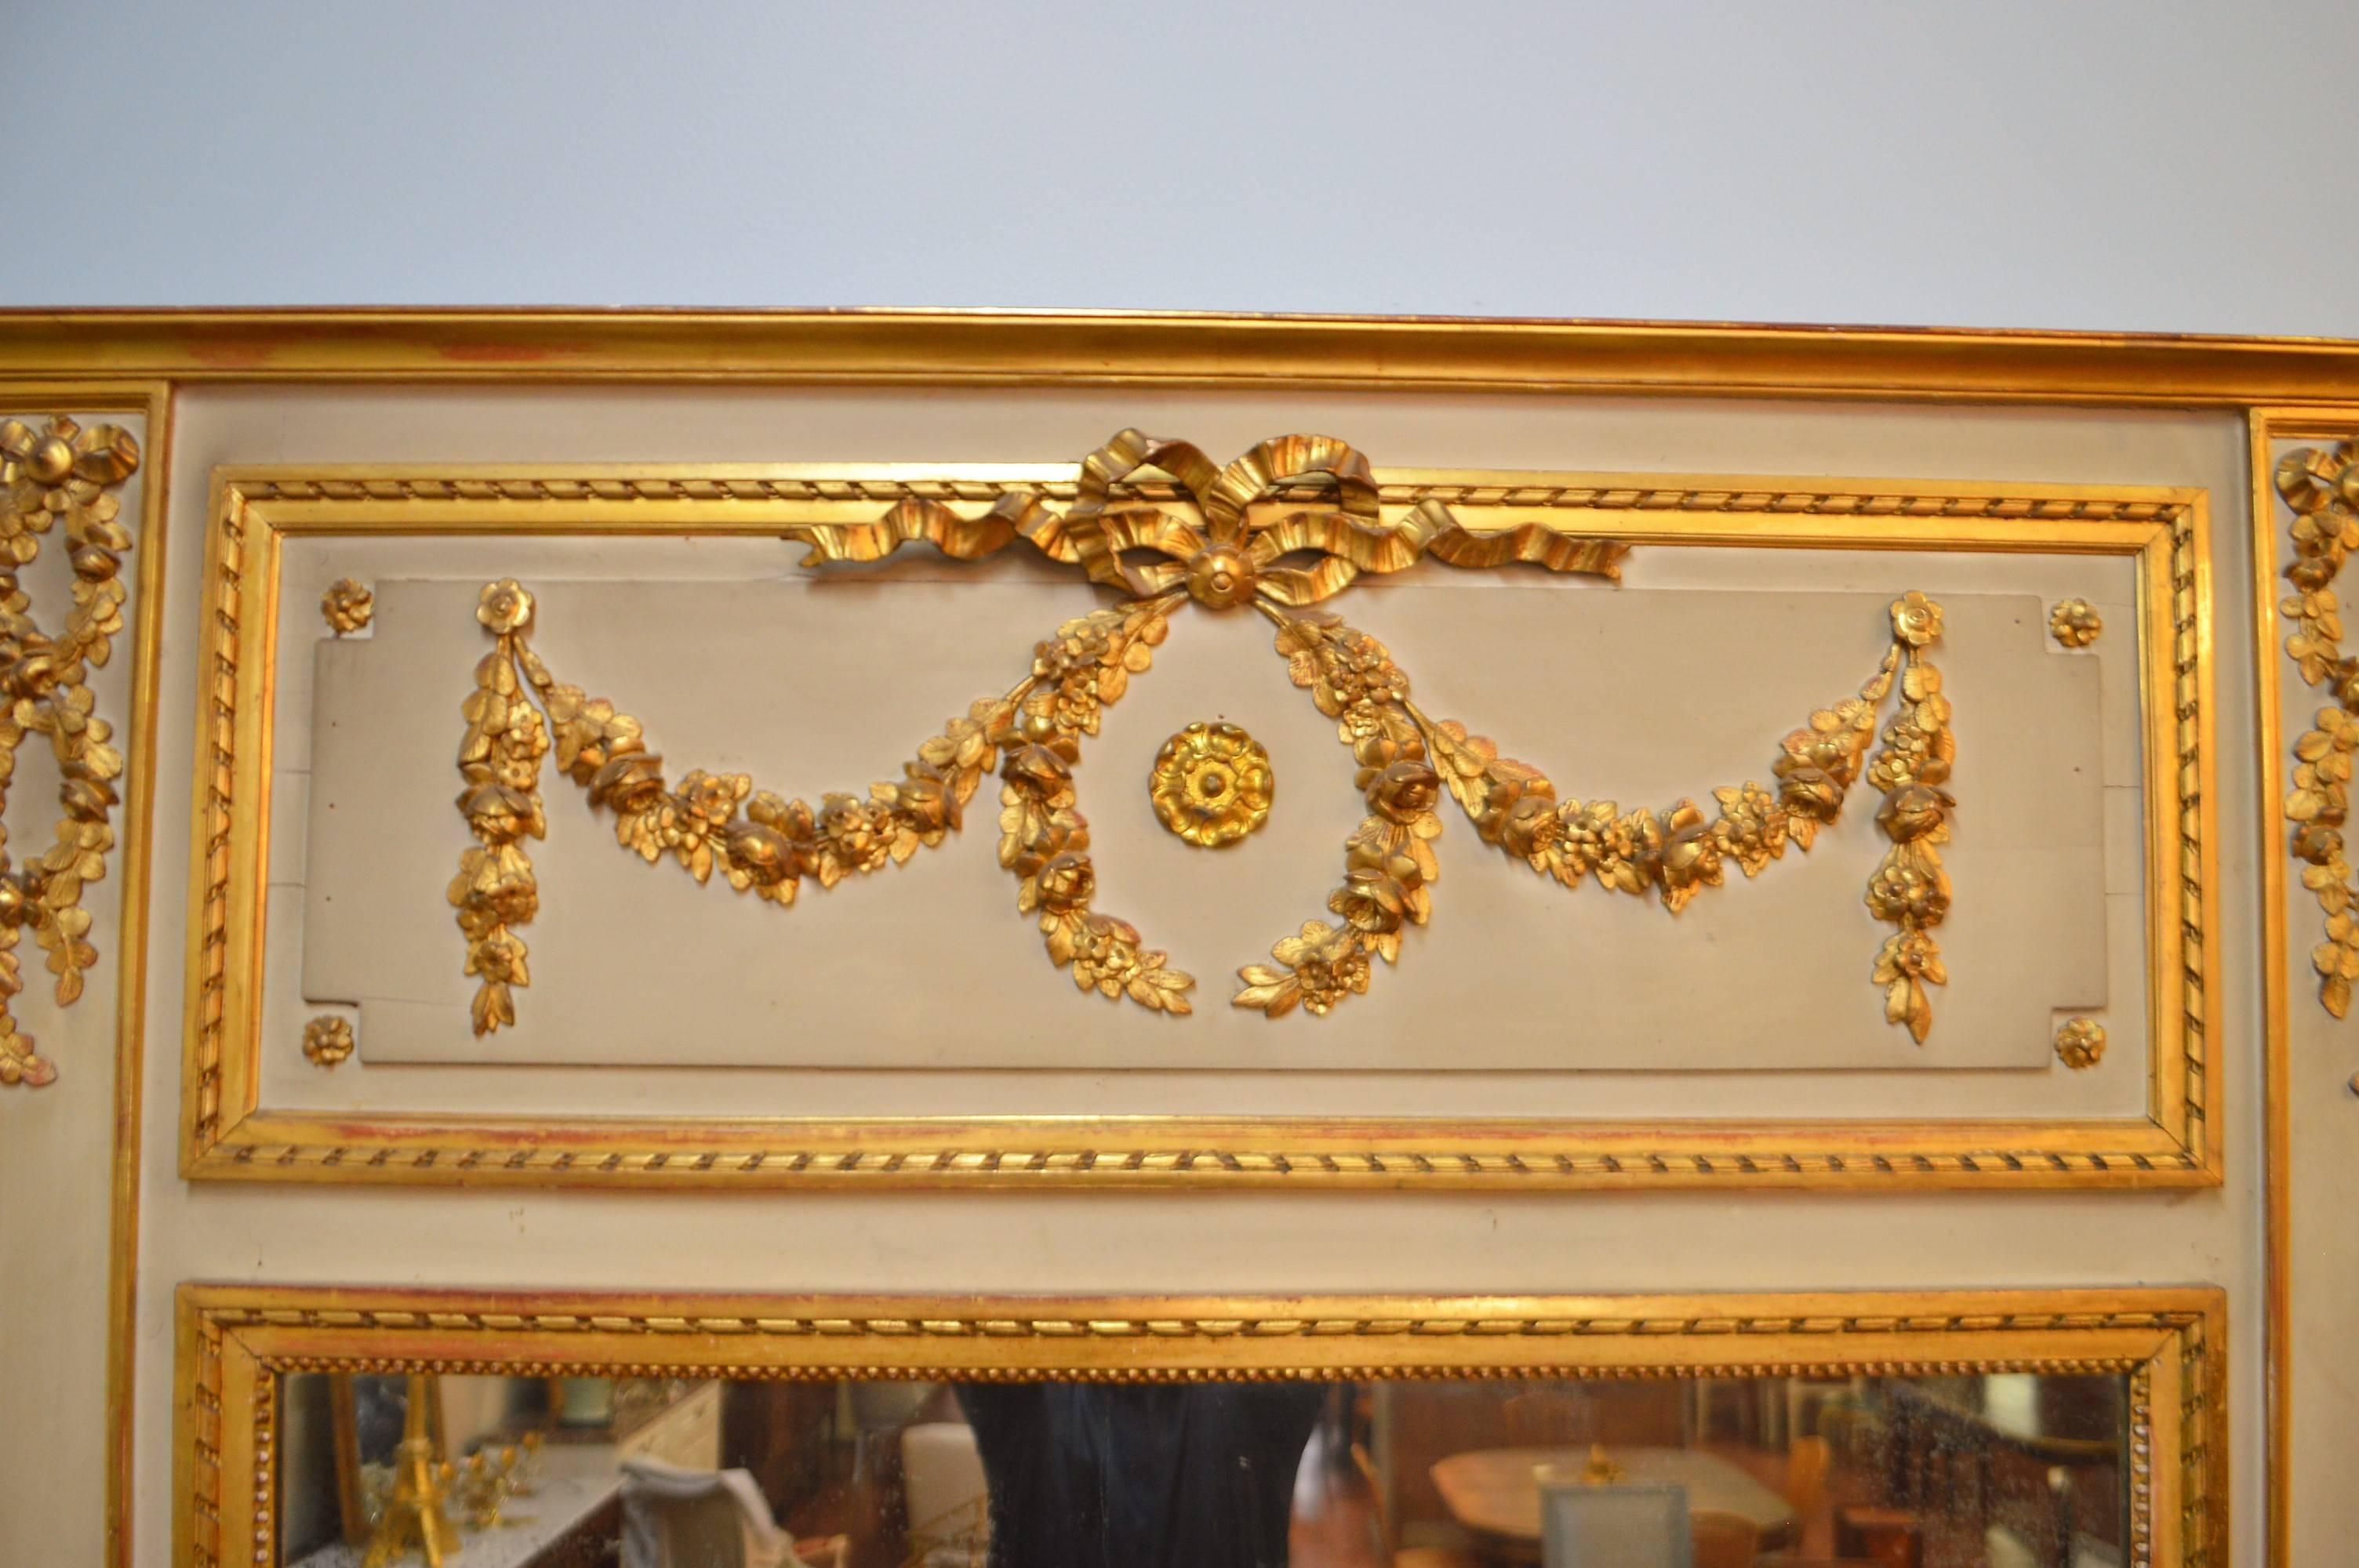 Louis XVI style trumeau mirror from France, good patina on the putty color paint. The gilded details representing hand-carved wreath of flower and acanthus leaves and the typical Louis XVI style rope carving around the inner frame.
The mirror is